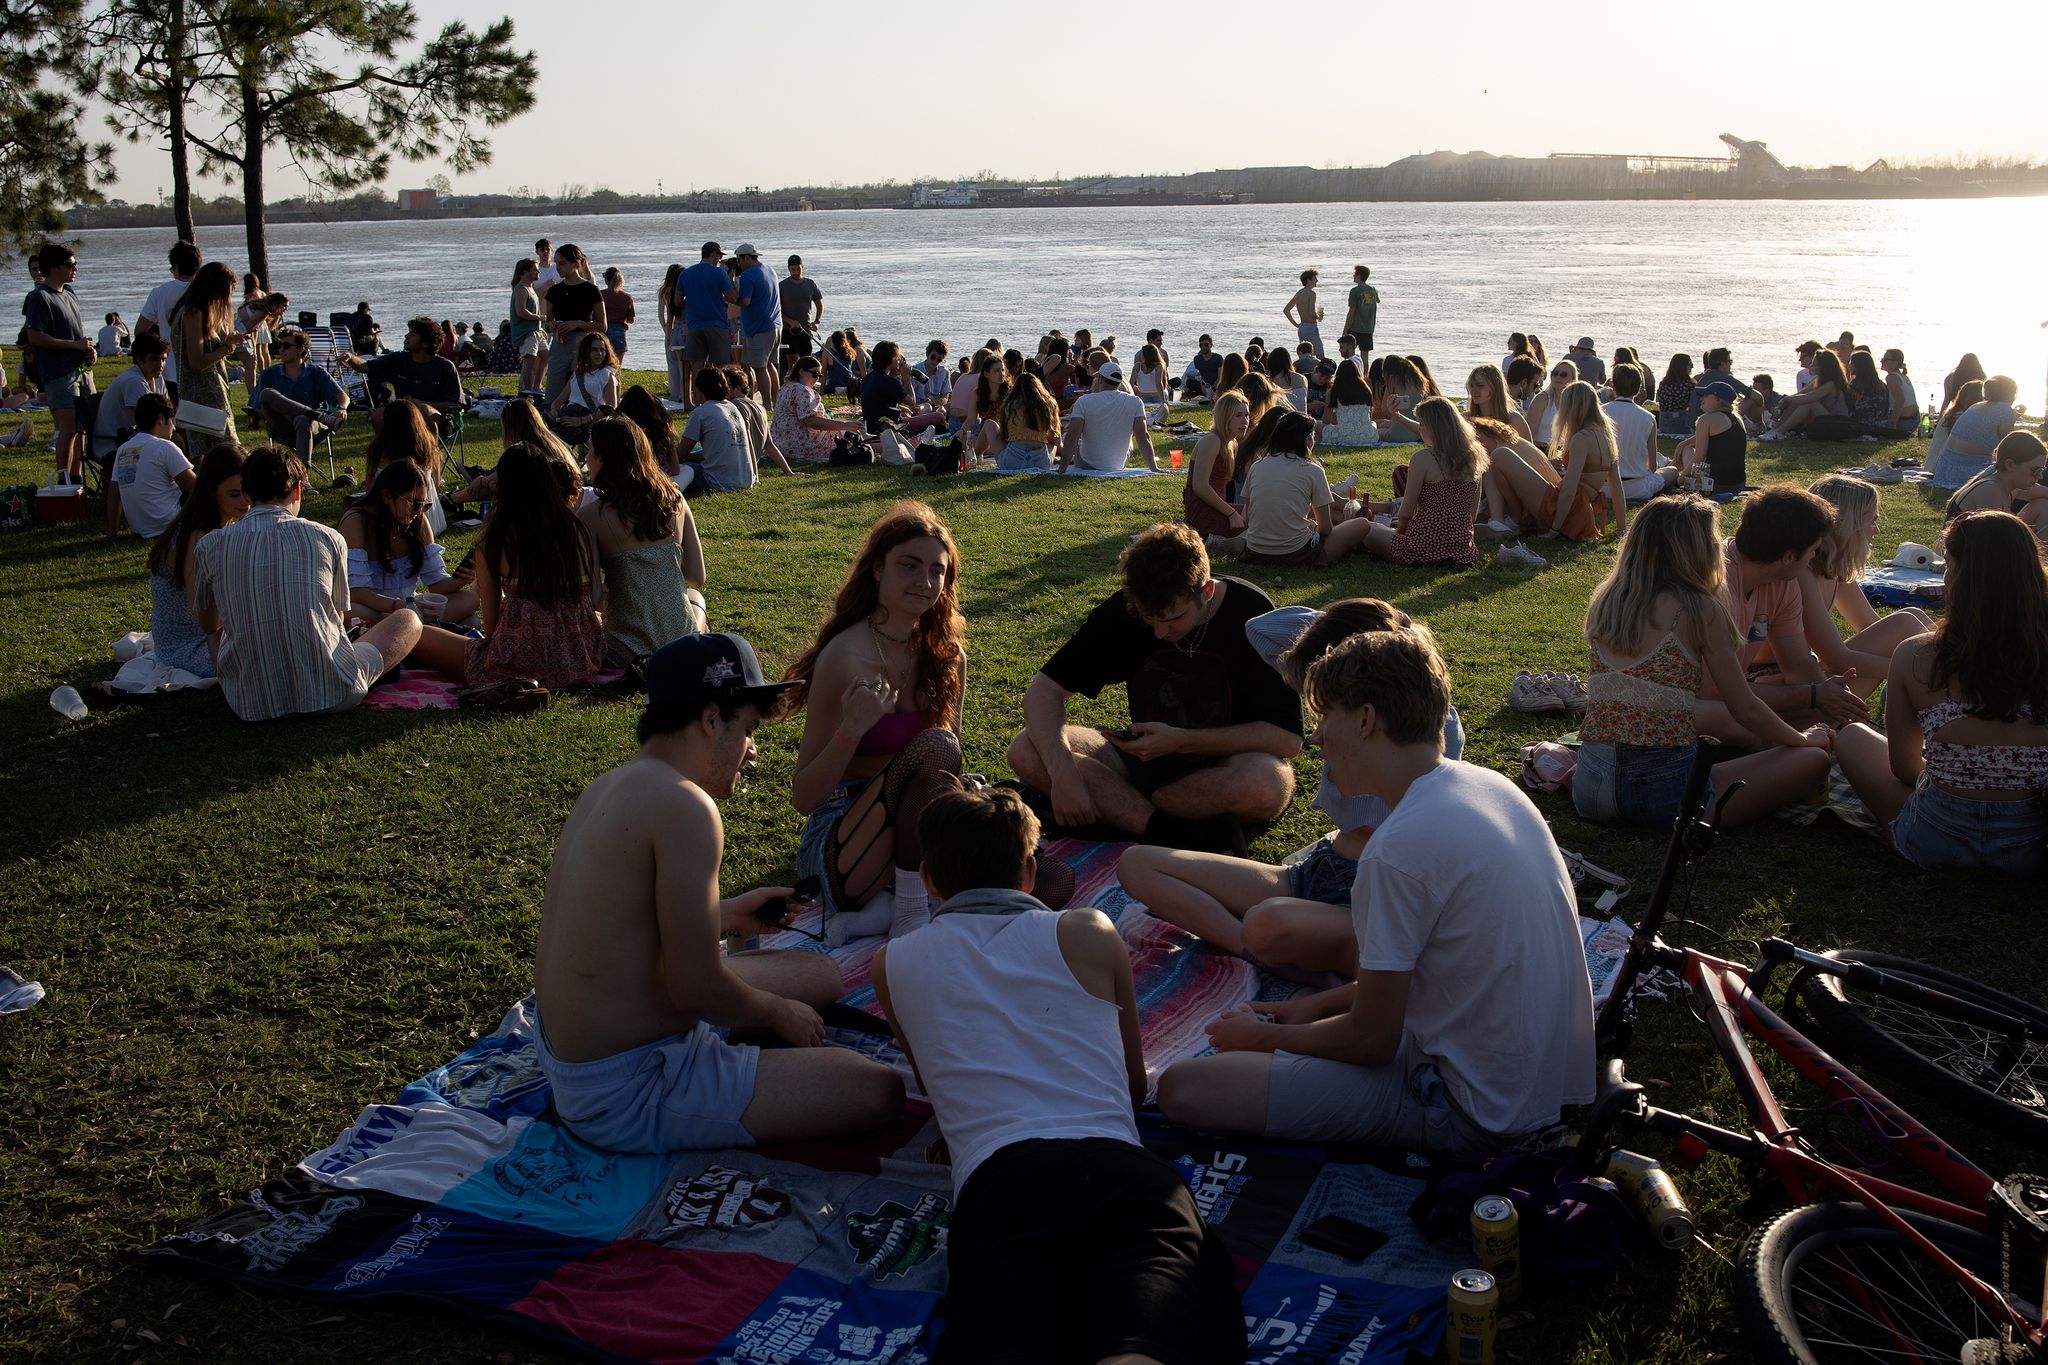 college students from tulane spend friday evening socializing on the banks of the mississippi river on march 18, 2022 in new orleans, louisiana